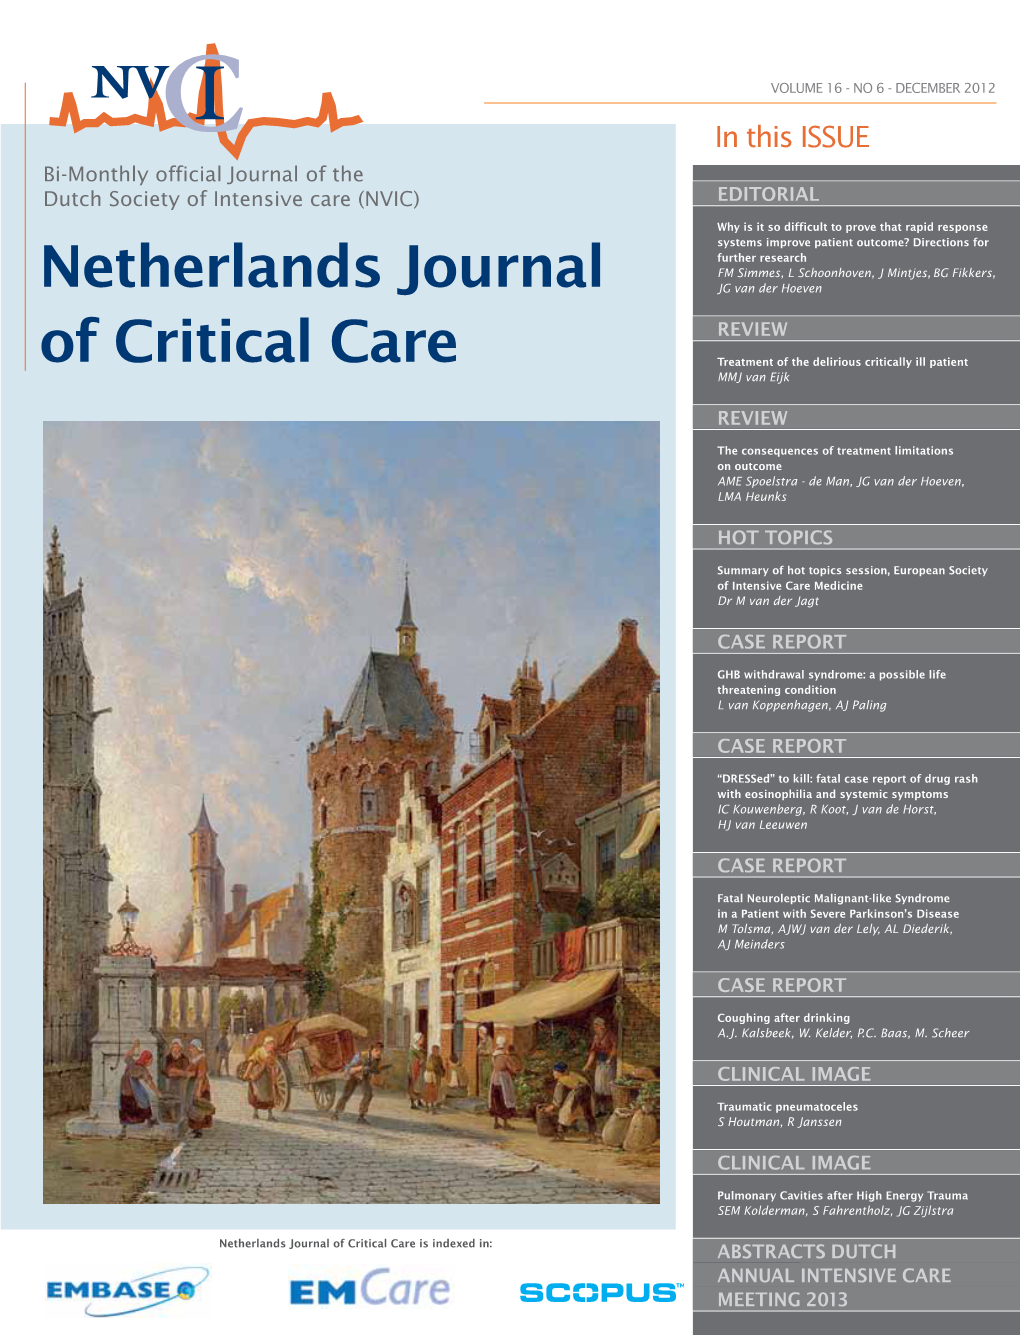 Netherlands Journal of Critical Care Is Indexed In: Abstracts Dutch Annual Intensive Care Meeting 2013 Evidence